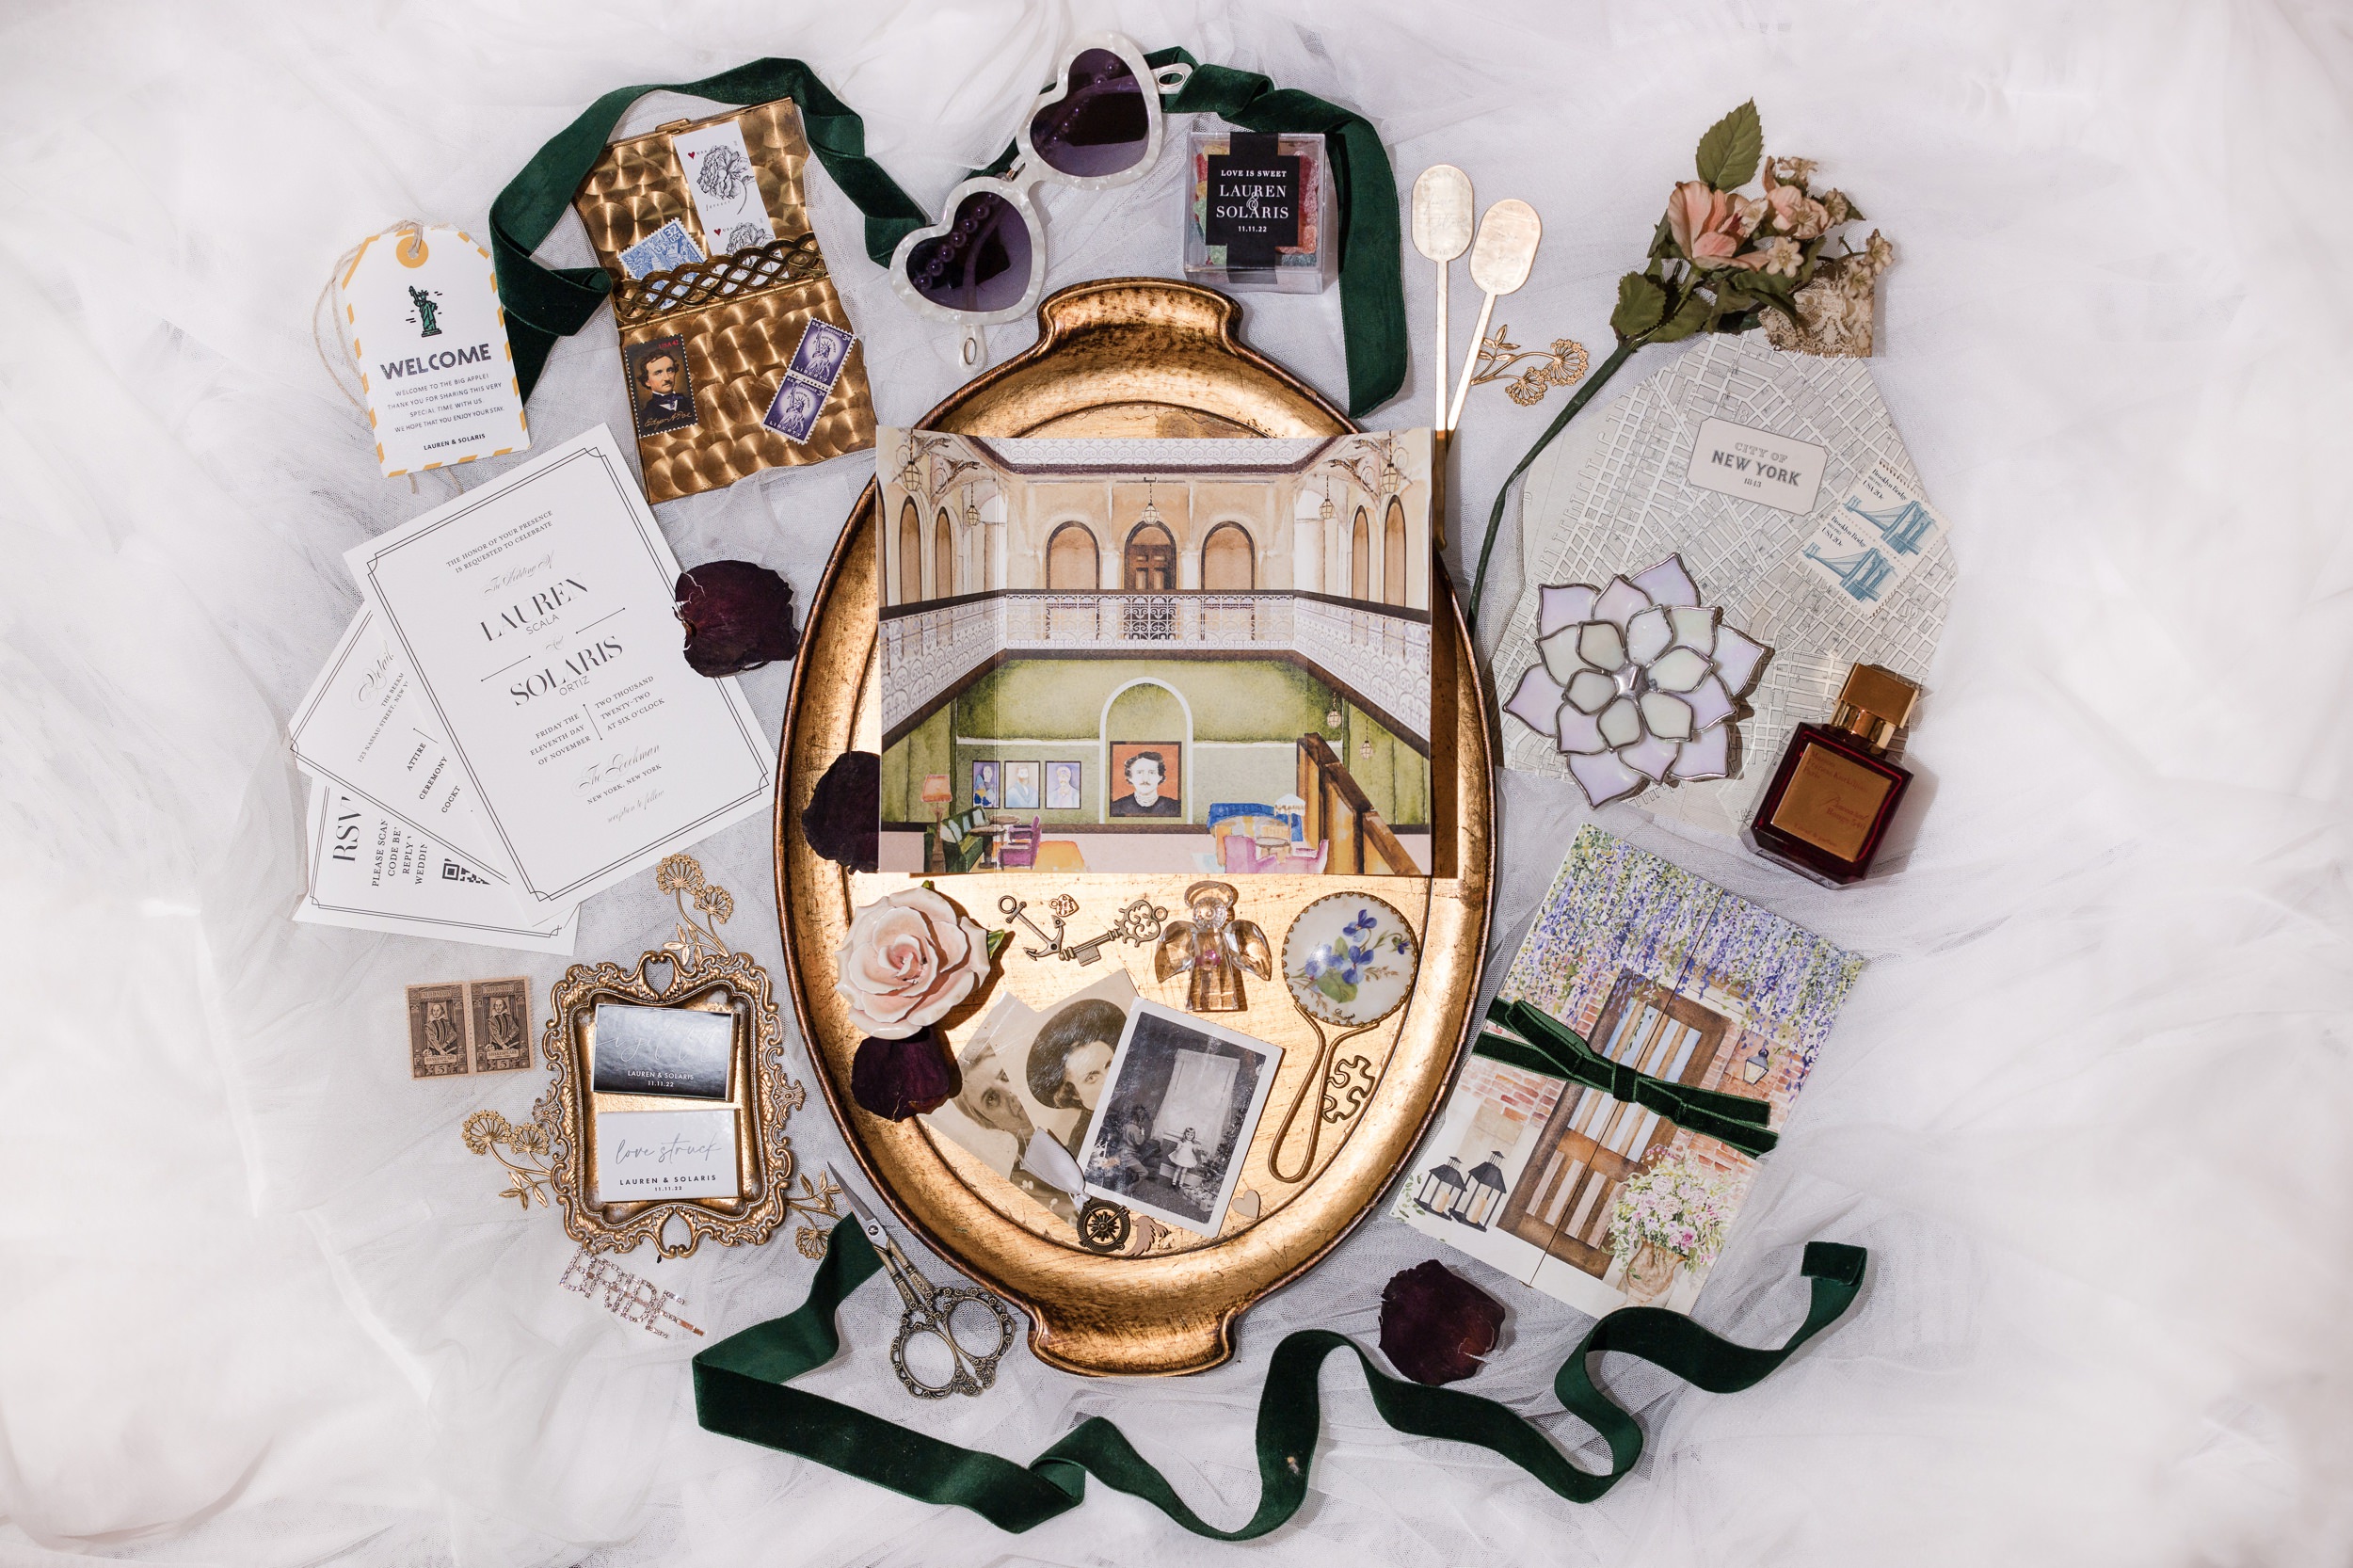 Flat lay image of a wedding invitation, ribbon, and other wedding details at the Beekman Hotel in NYC